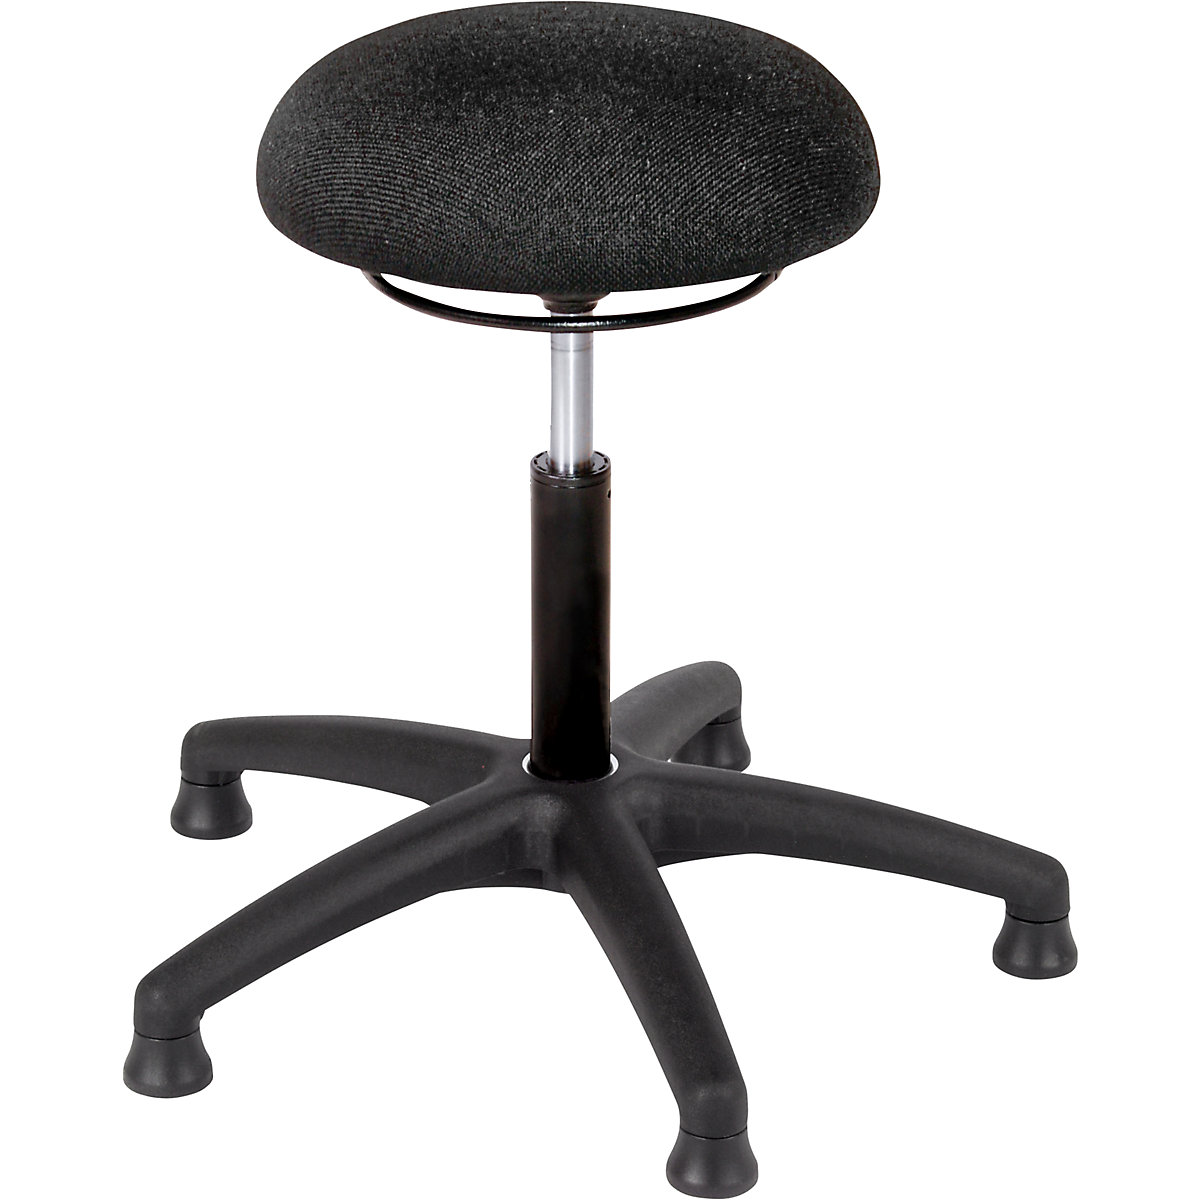 Industrial swivel stool upholstered with fabric cover – meychair, gas lift height adjustment, five-star base with floor glides-2